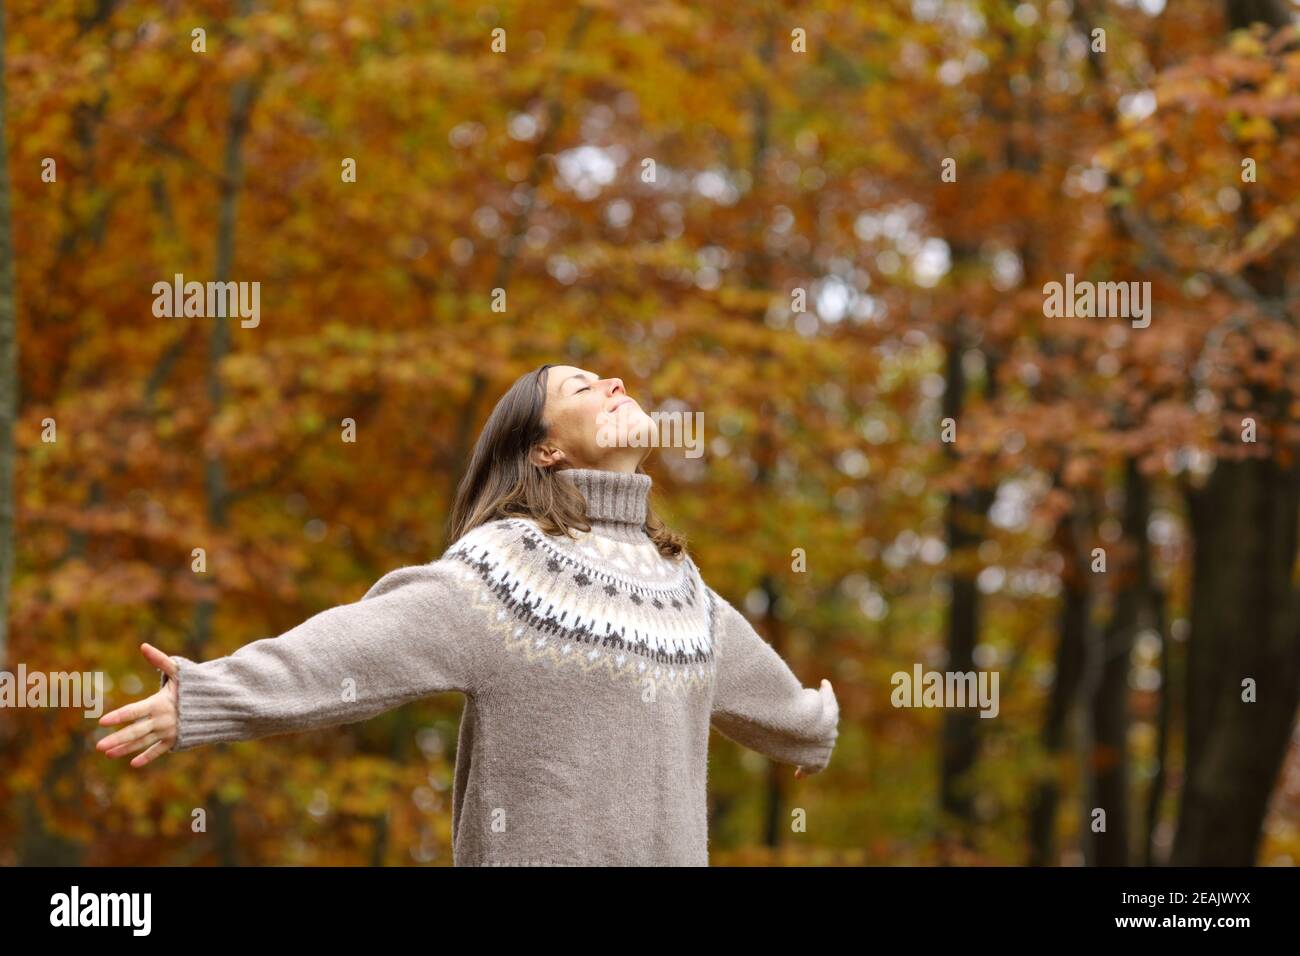 Middle age woman stretching arms in a forest in autumn Stock Photo